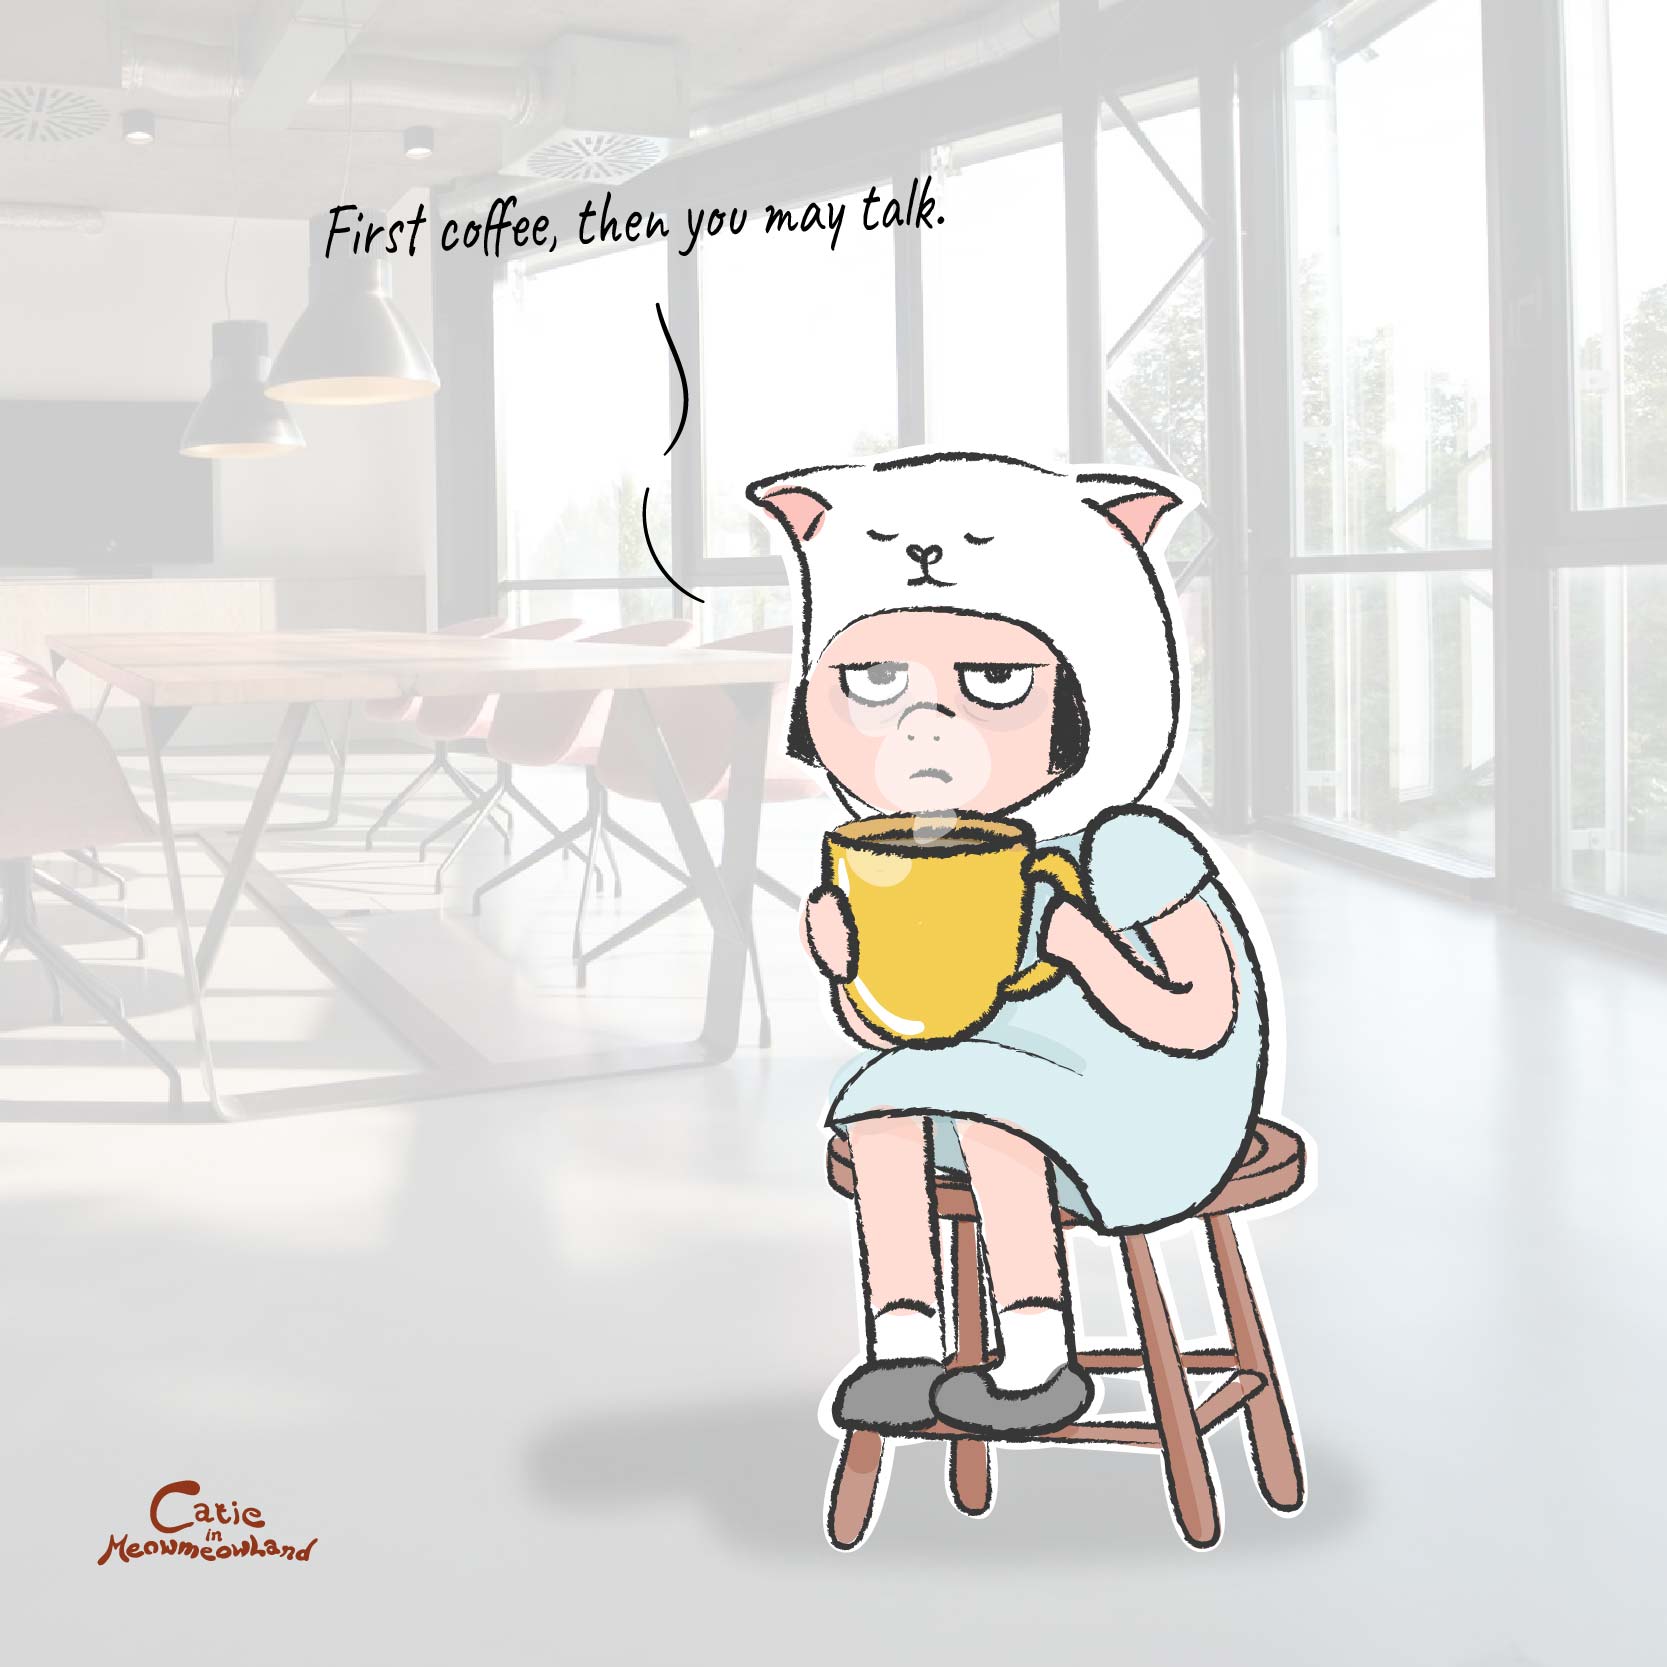 Catie in MeowmeowLand - Doodle illustration - Coffee